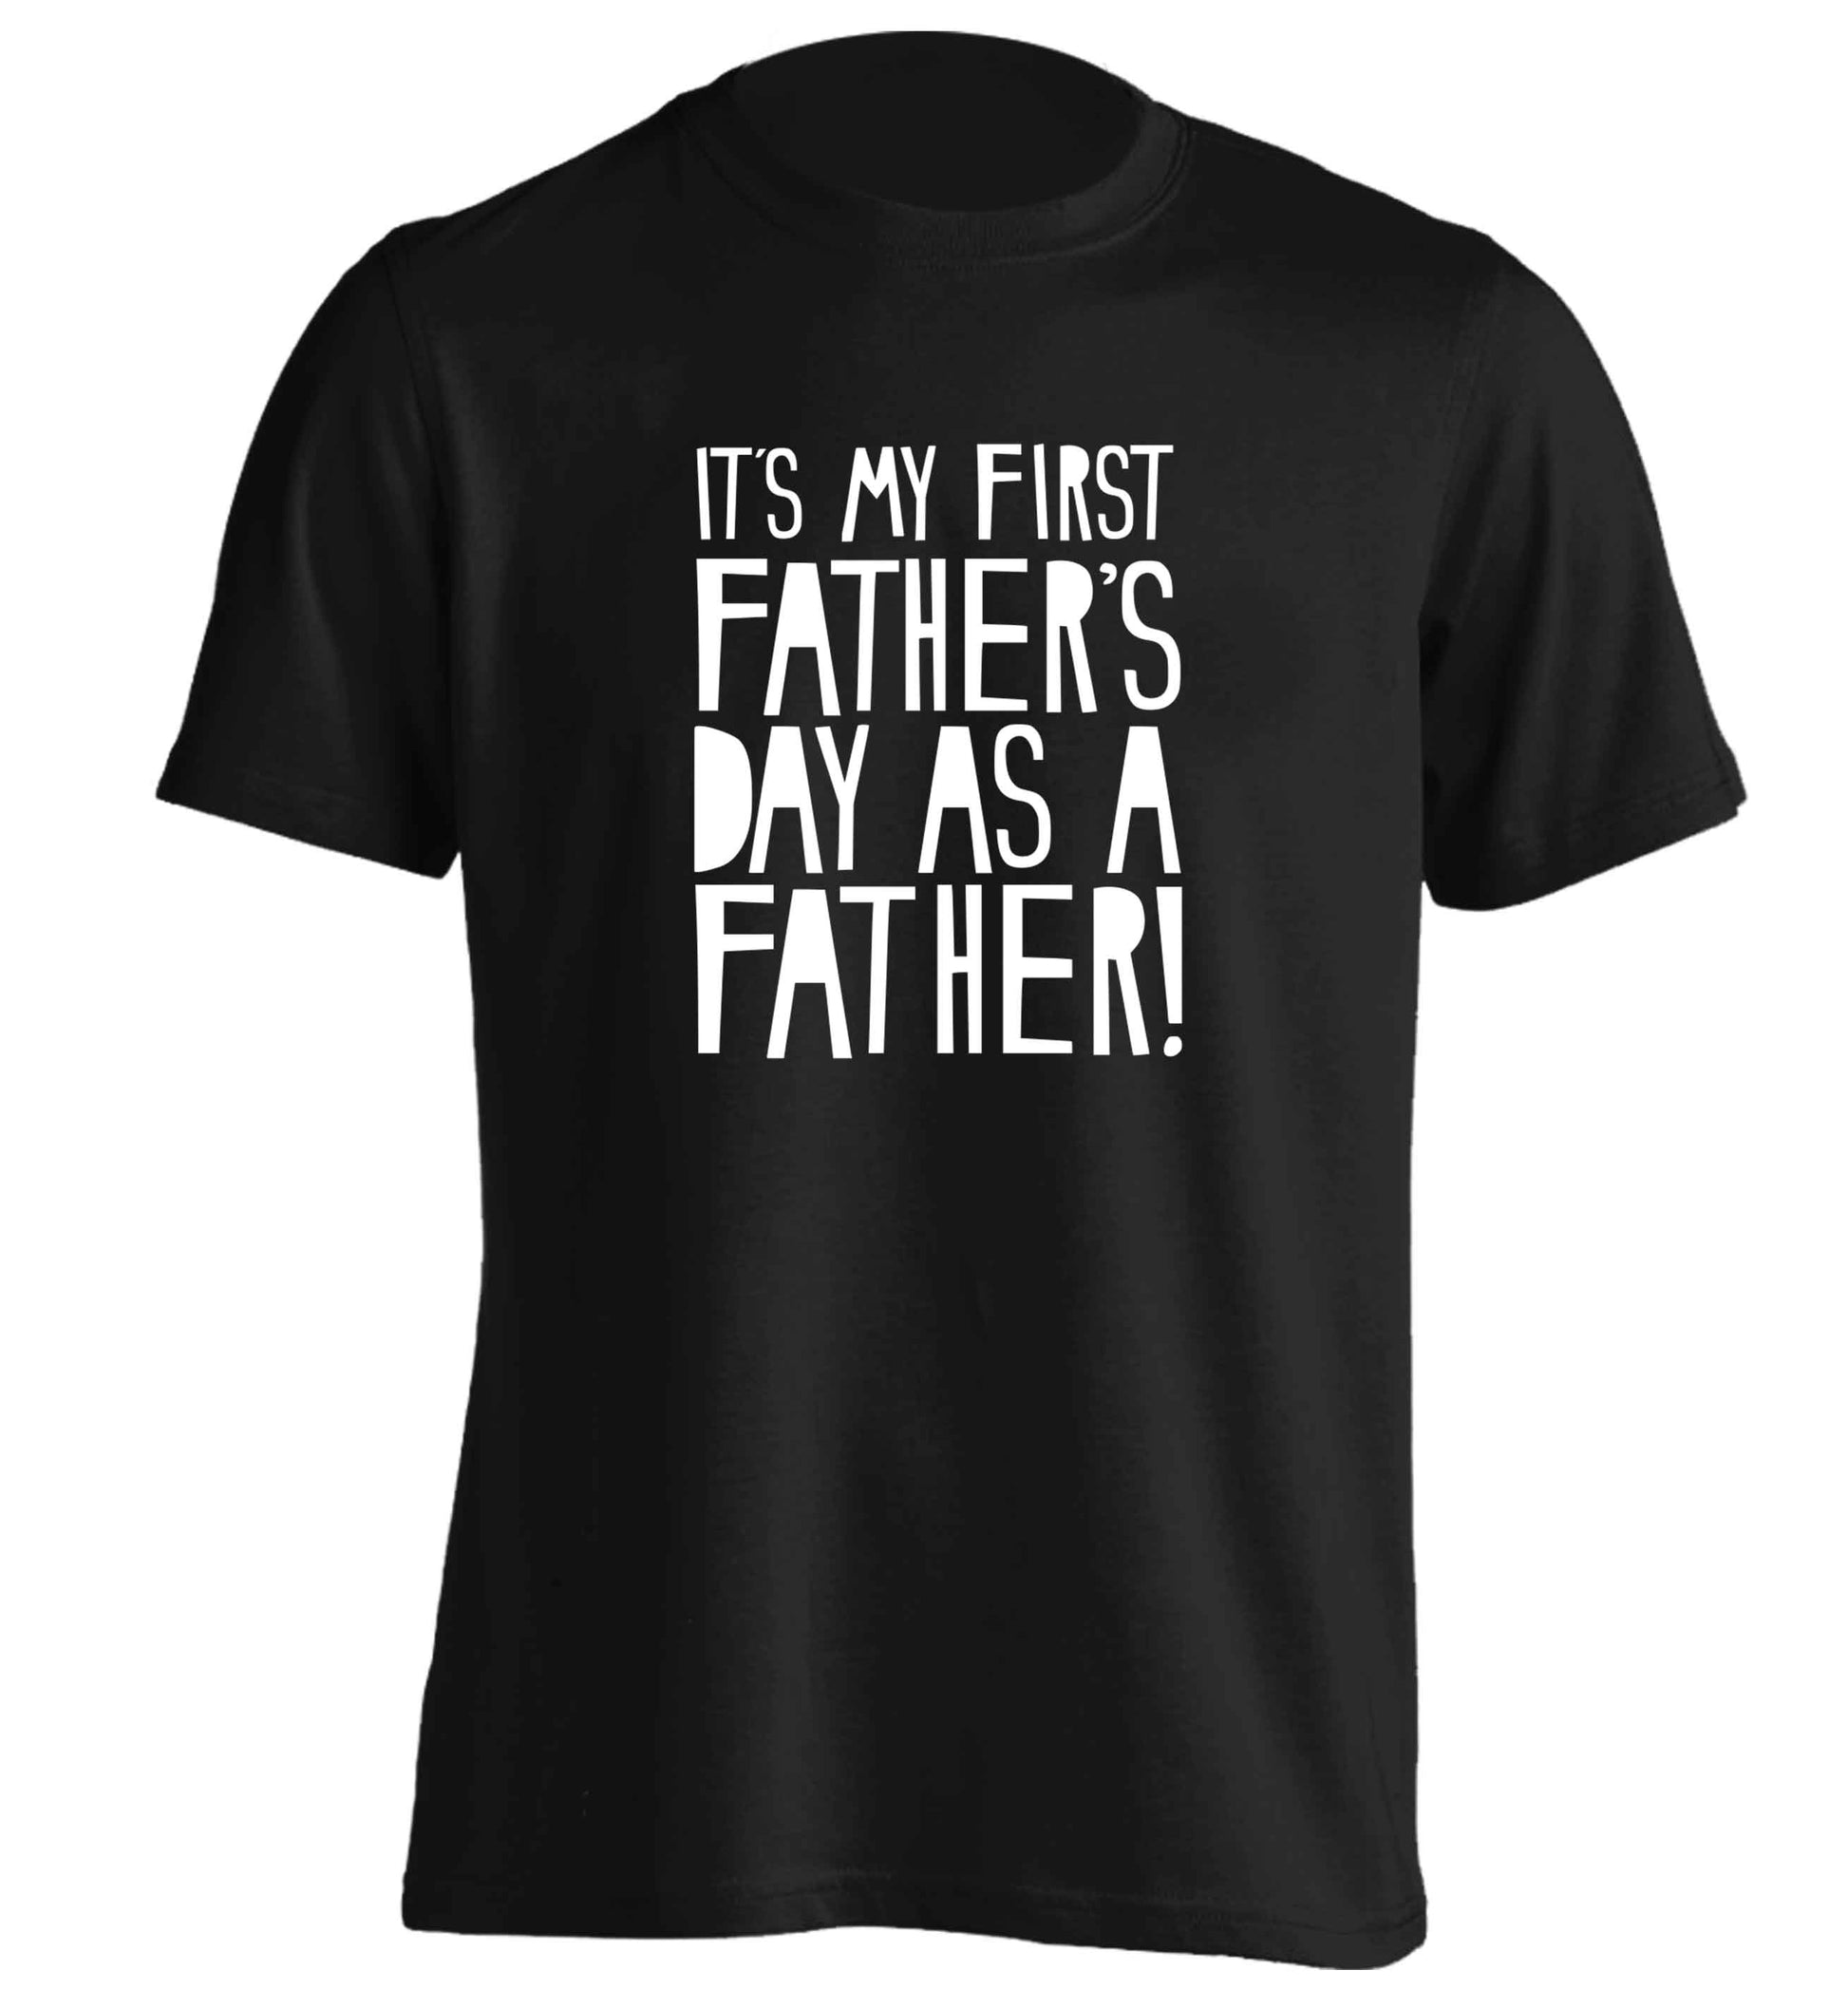 It's my first father's day as a father! adults unisex black Tshirt 2XL